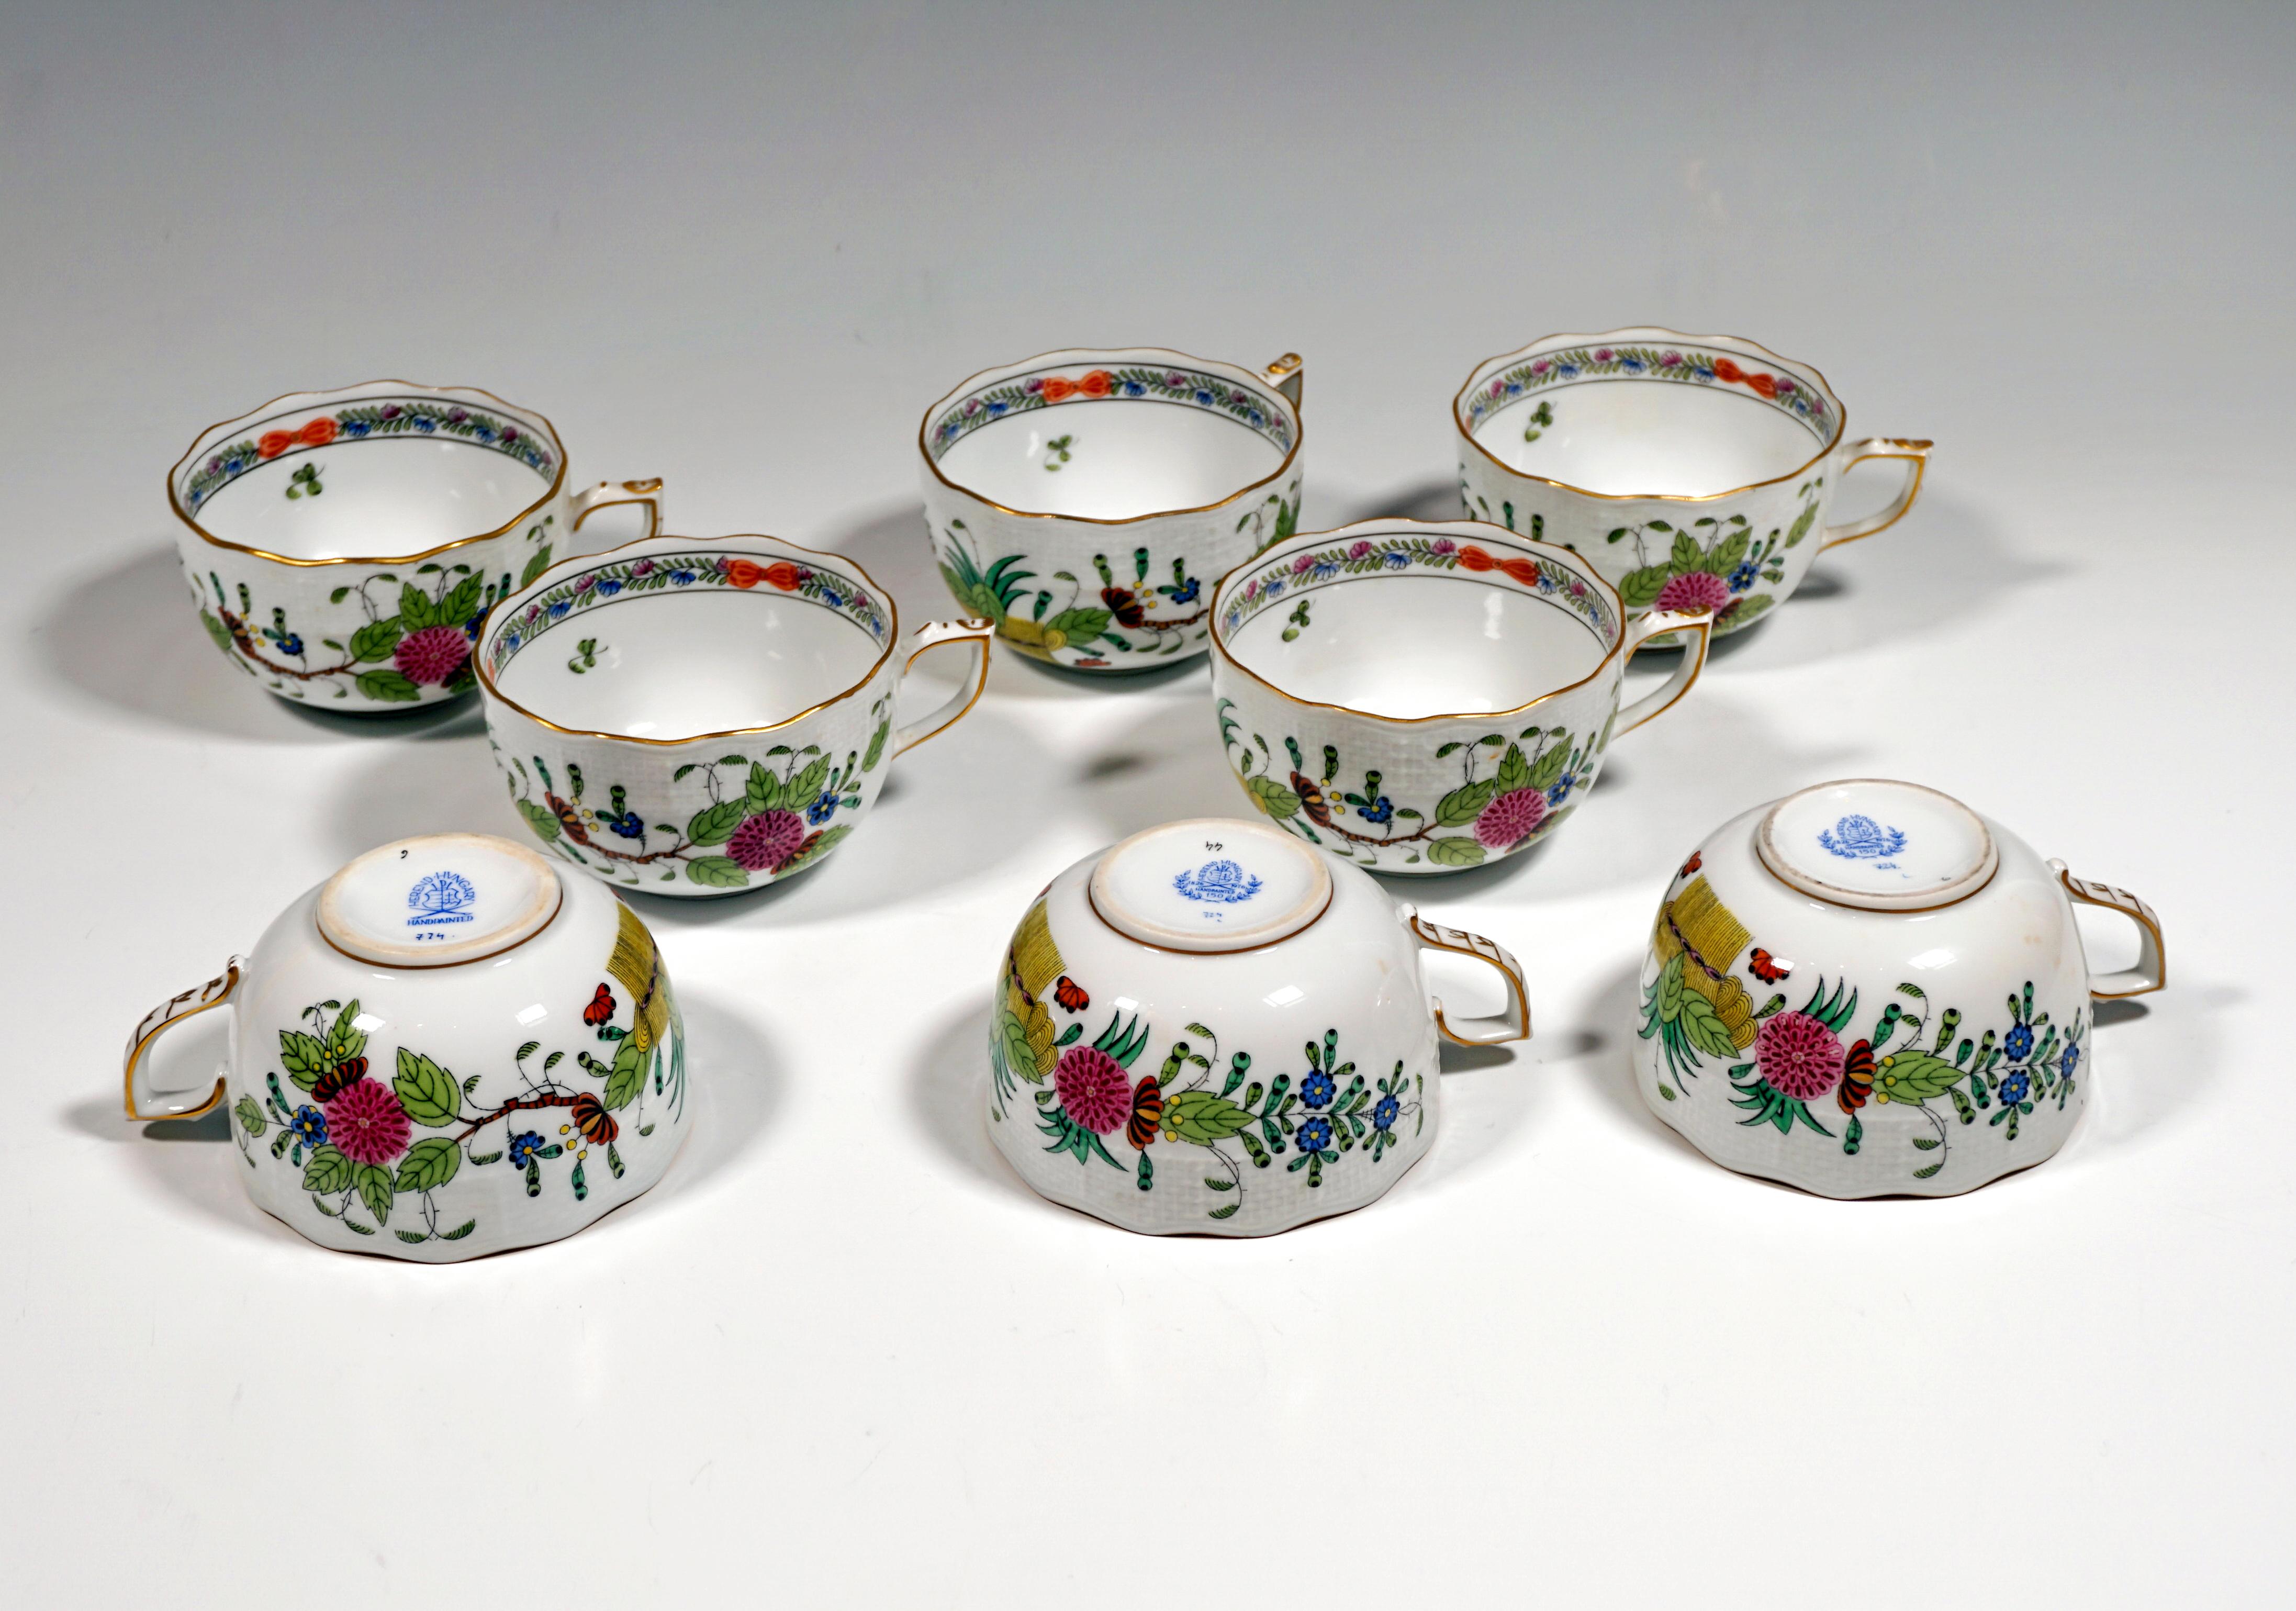 Porcelain Coffee and Tea Set for 8 Persons 'Fleurs des Indes' Herend Hungary, 20th Century